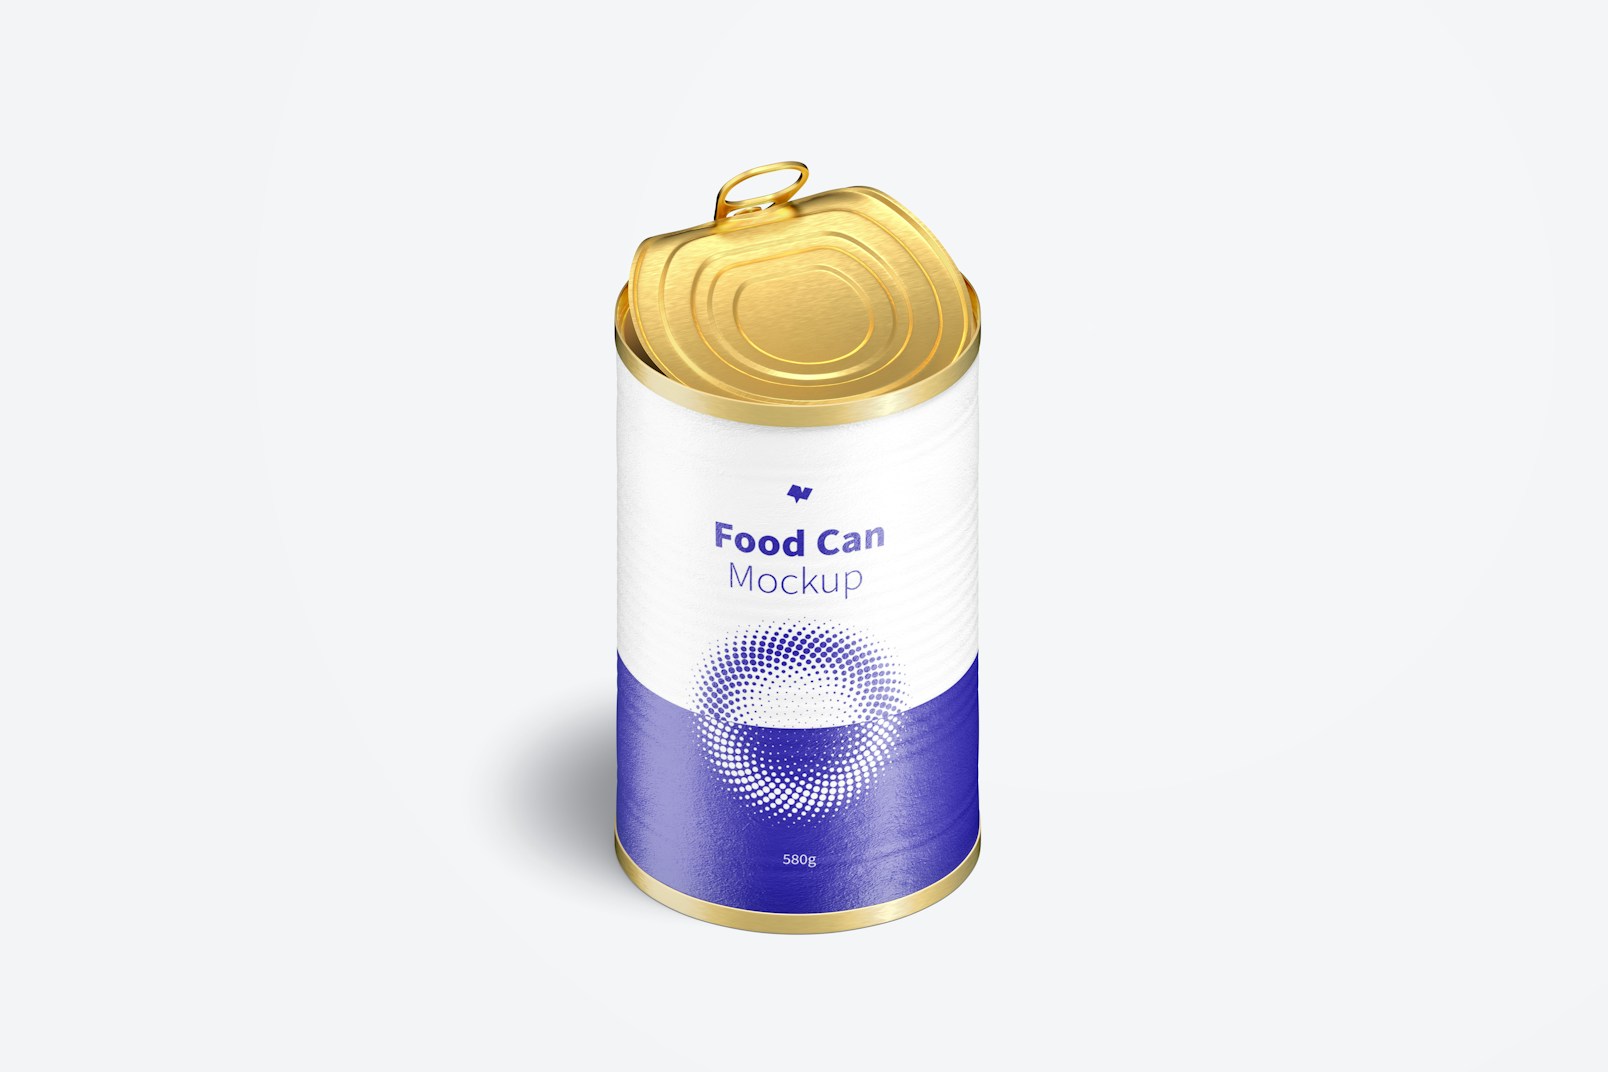 580g Food Can Mockup, Vertical Isometric View